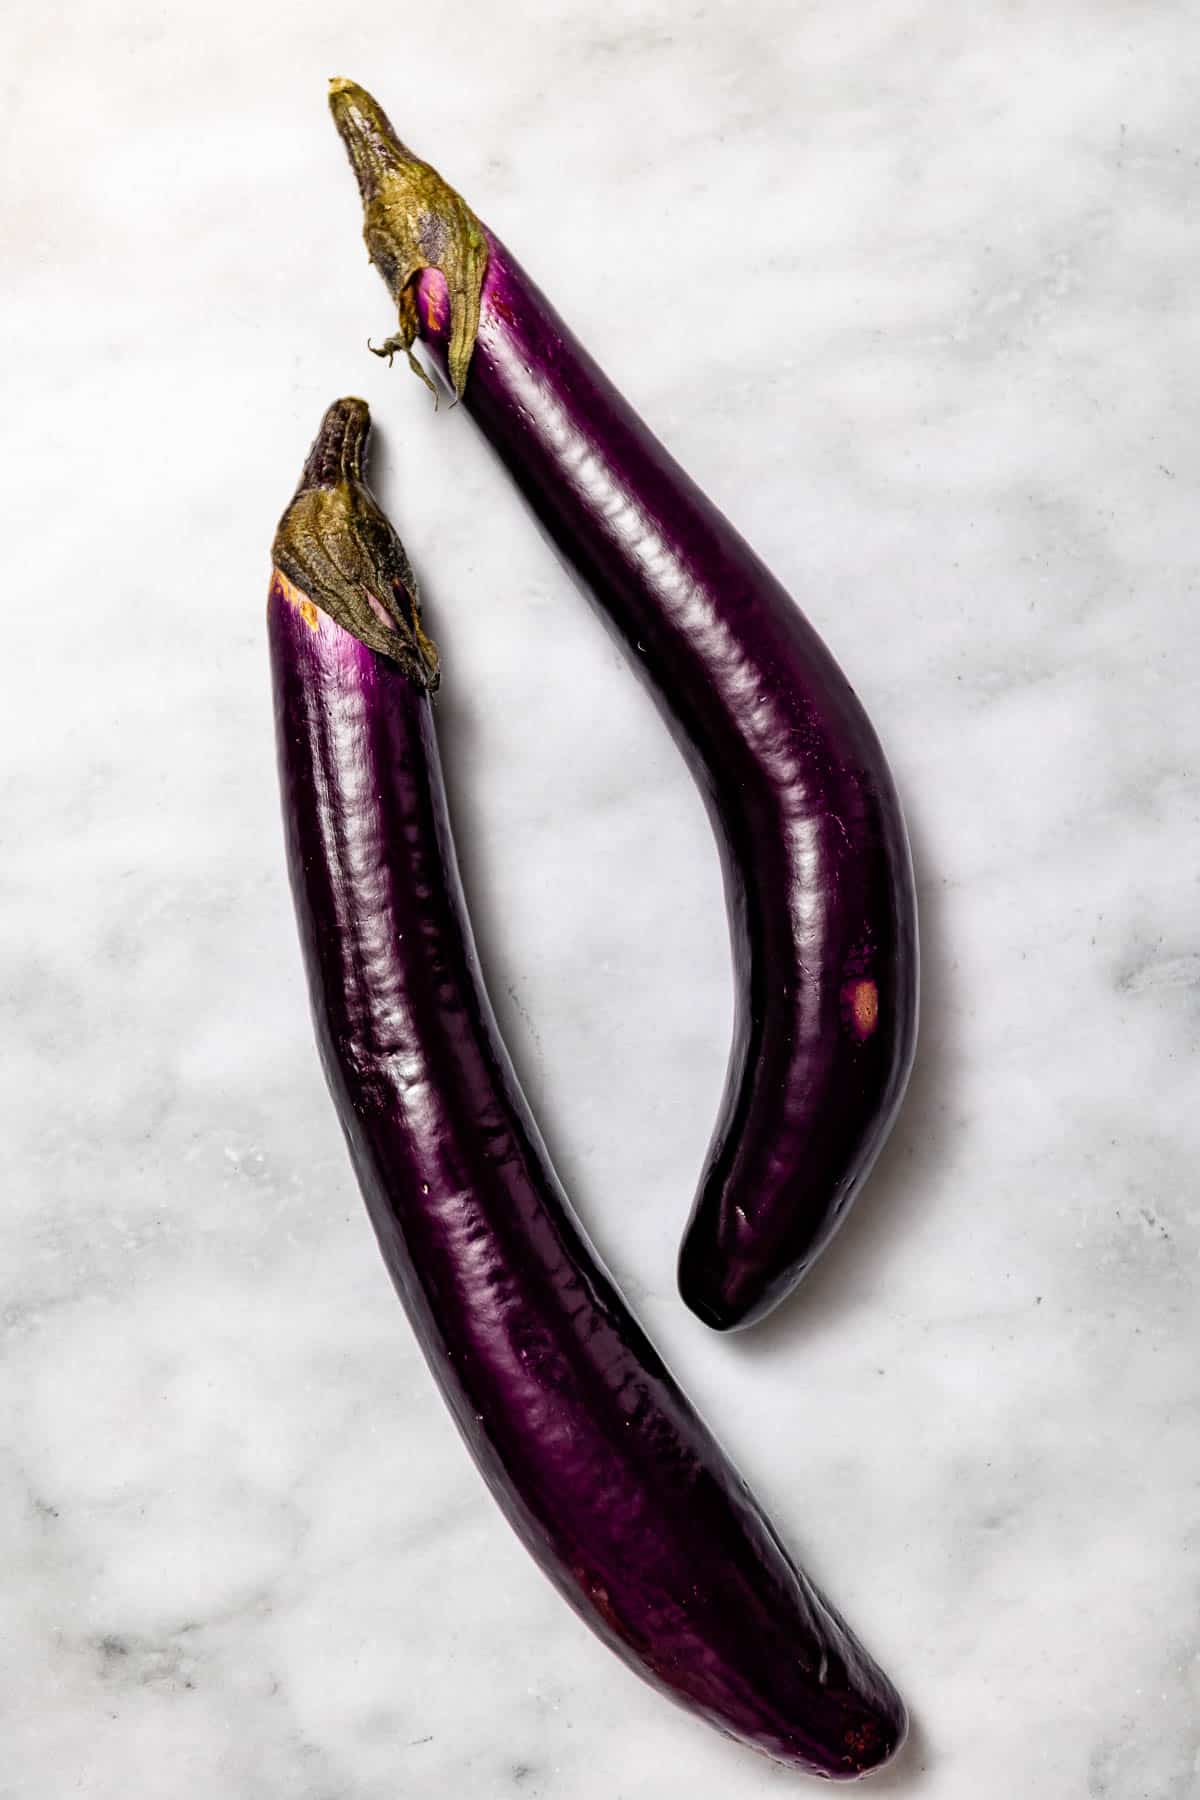 Chinese eggplants as one of the long thin eggplant varieties.